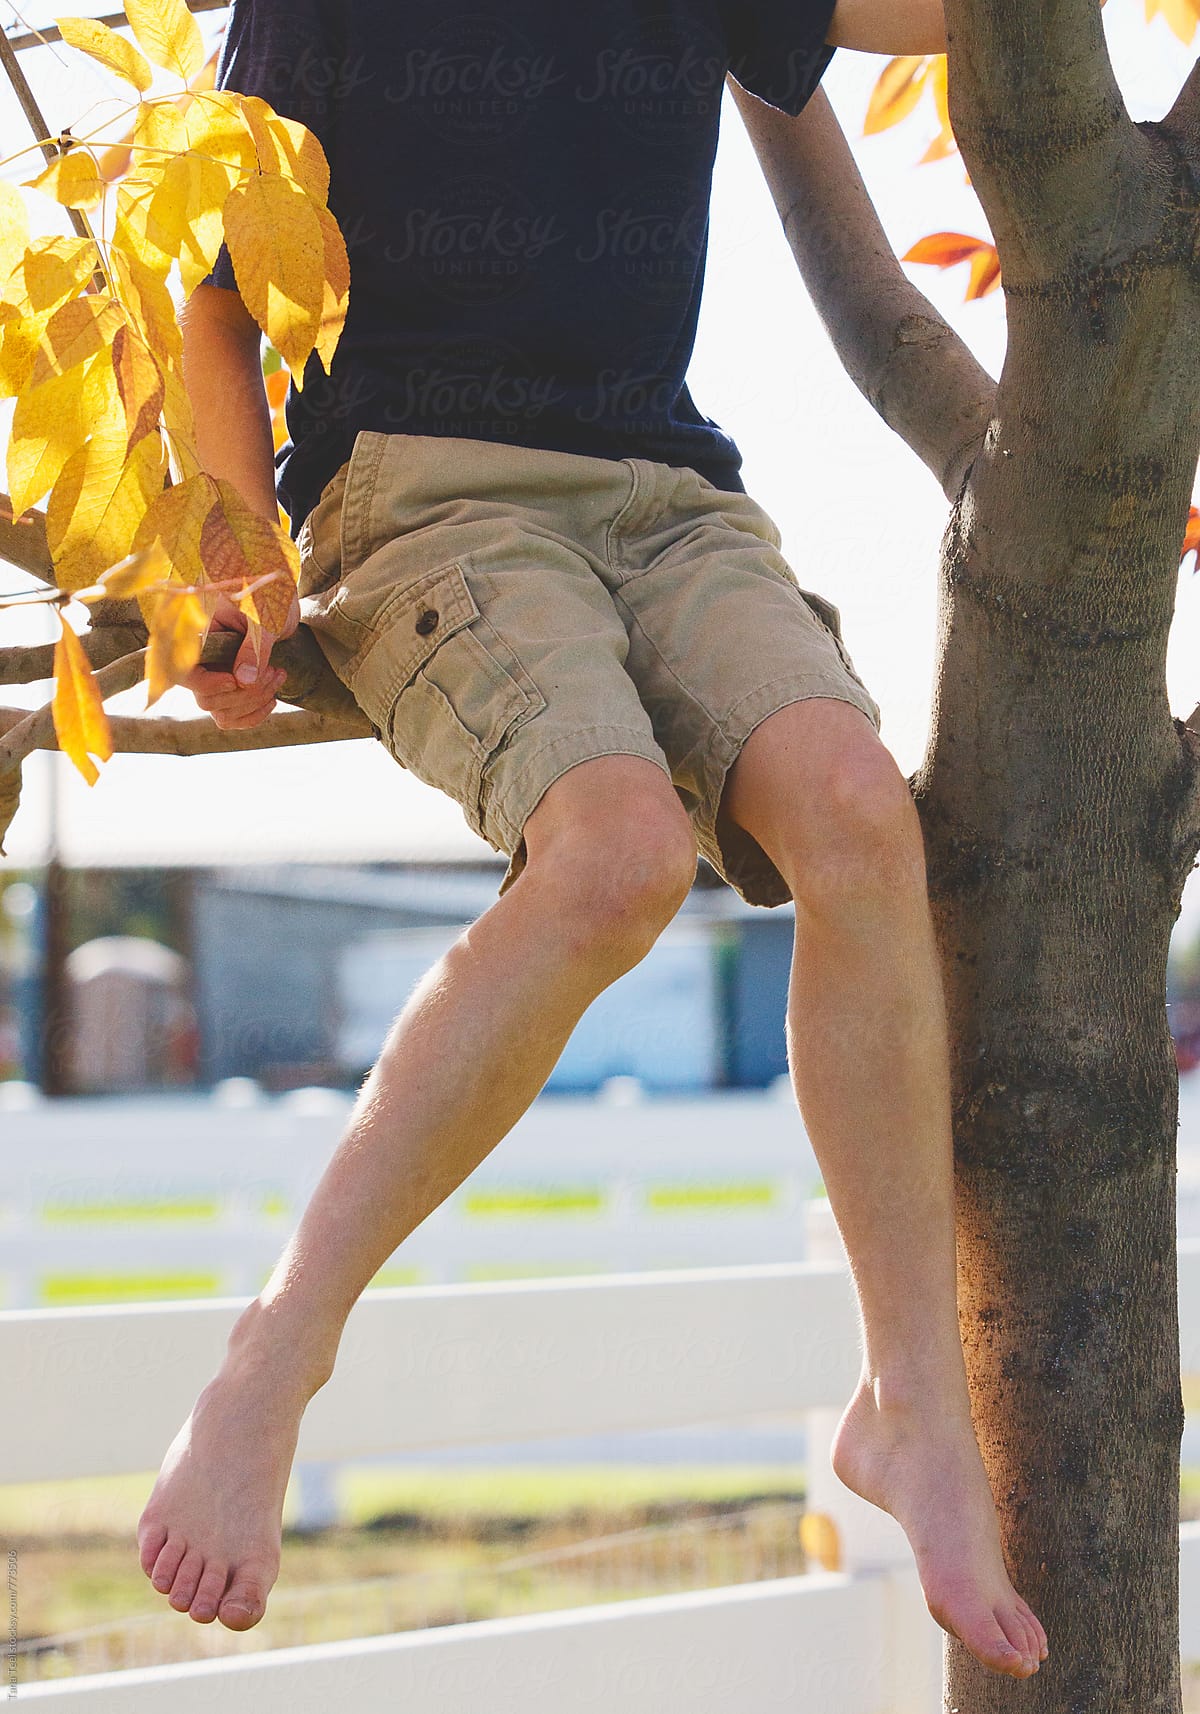 Series Of Young Boy Climbing In A Tree by Stocksy Contributor Tana Teel  - Stocksy